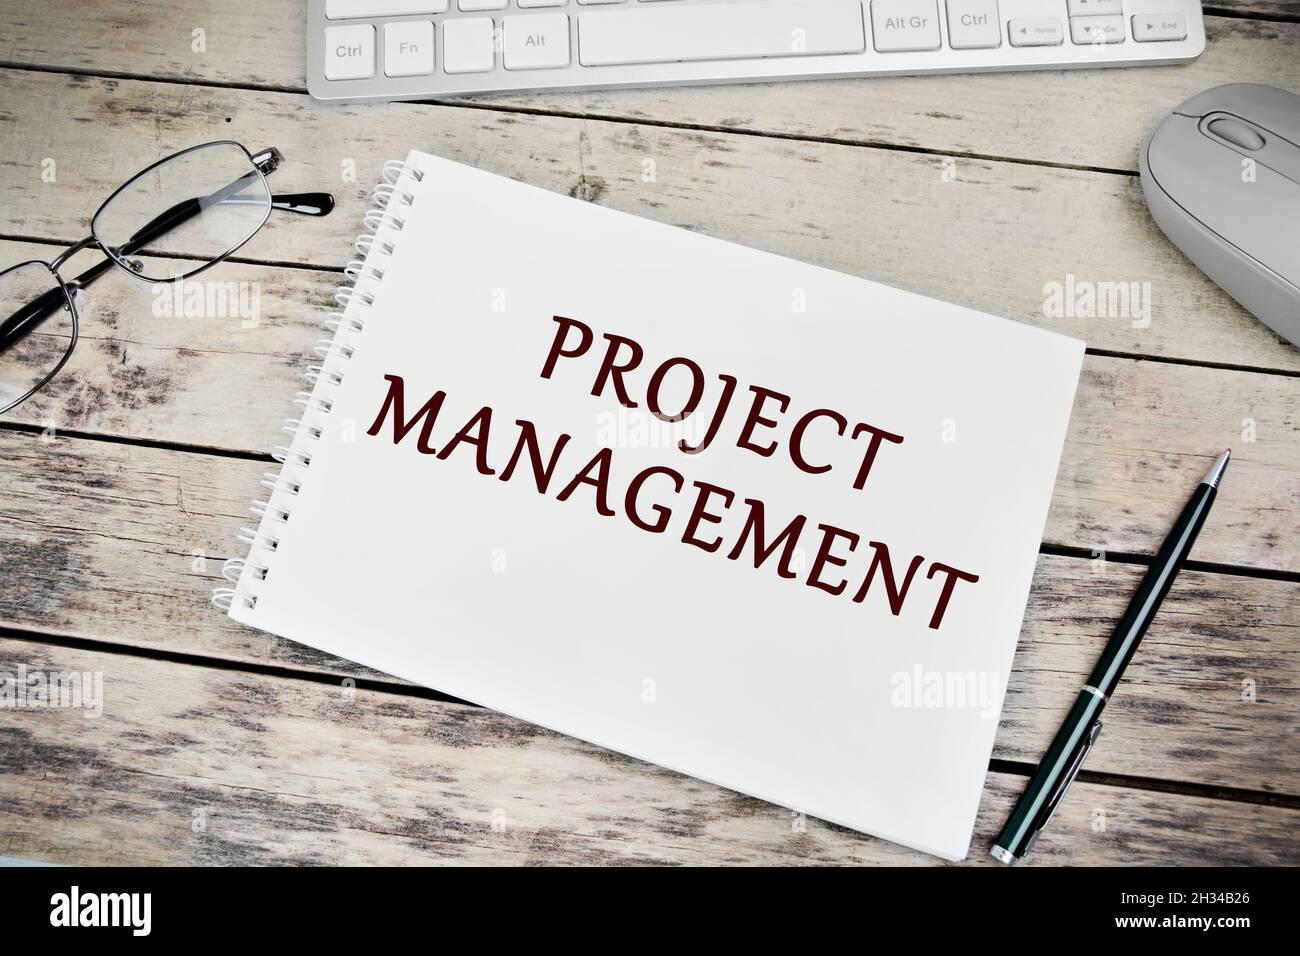 Project management words on notebook page Stock Photo